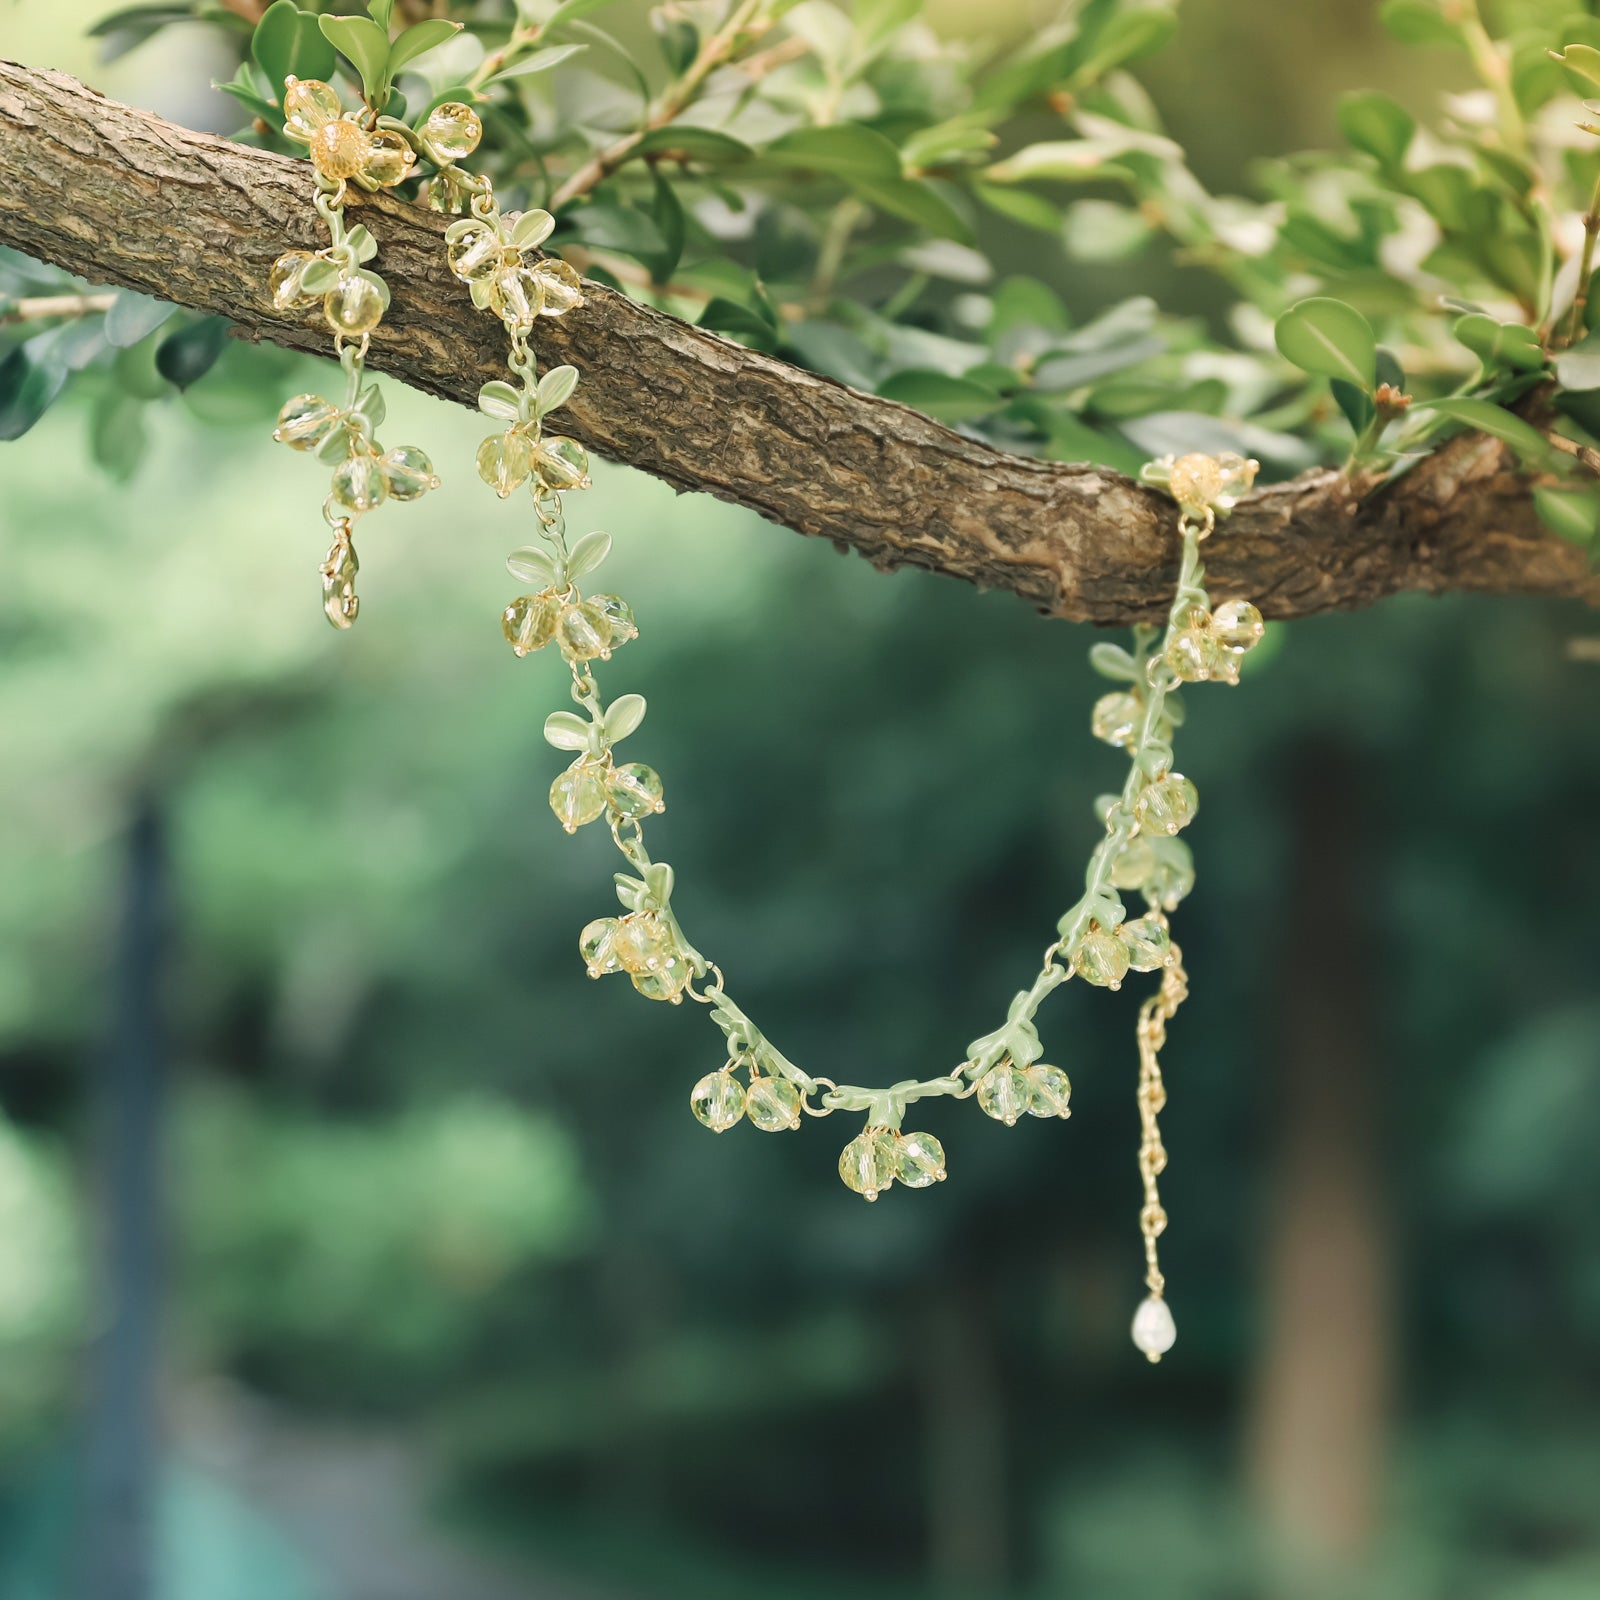 White Currant Berry Necklace